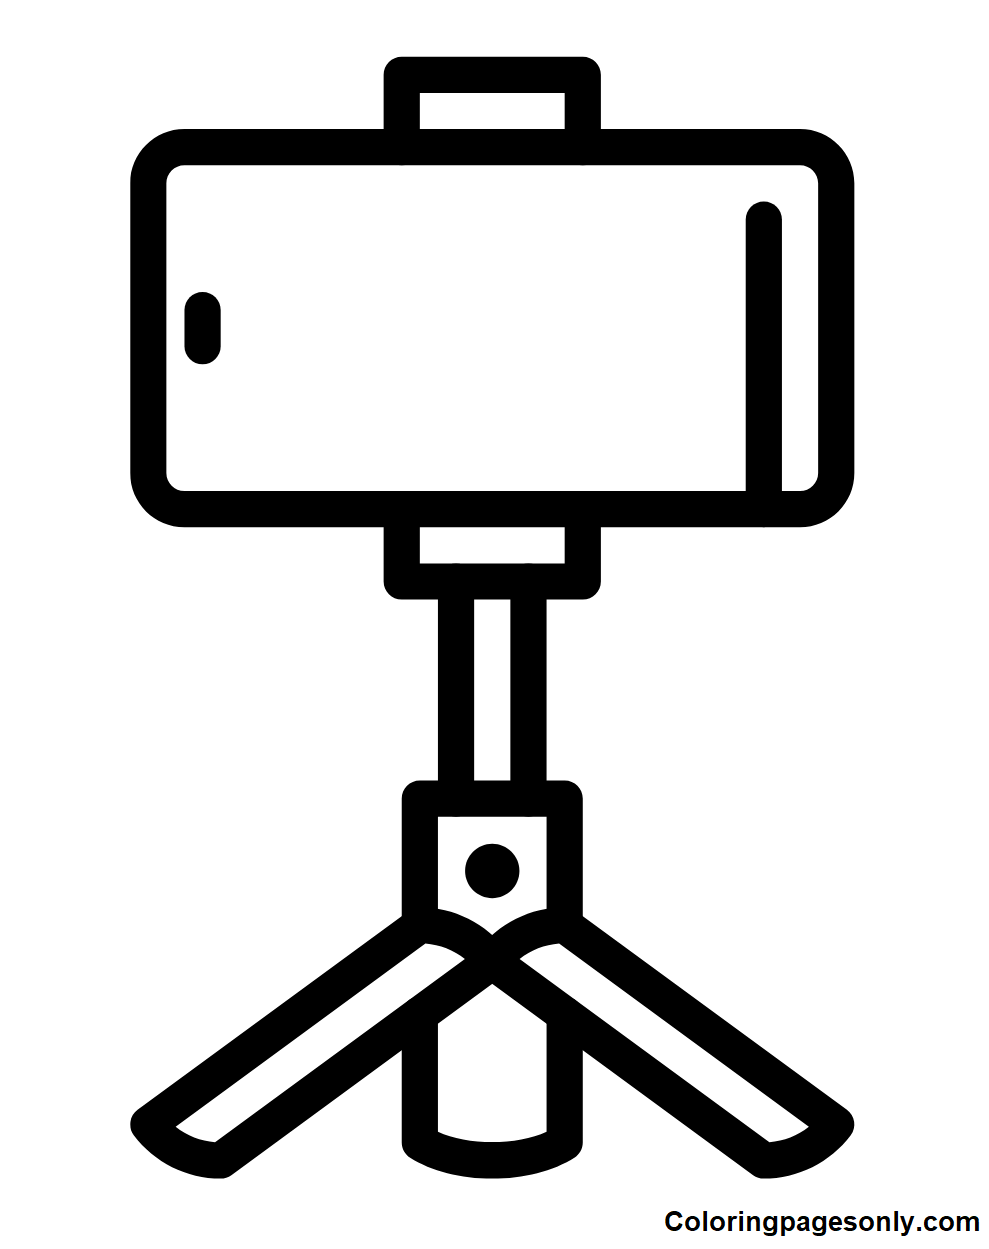 Smartphone on a Tripod Coloring Page